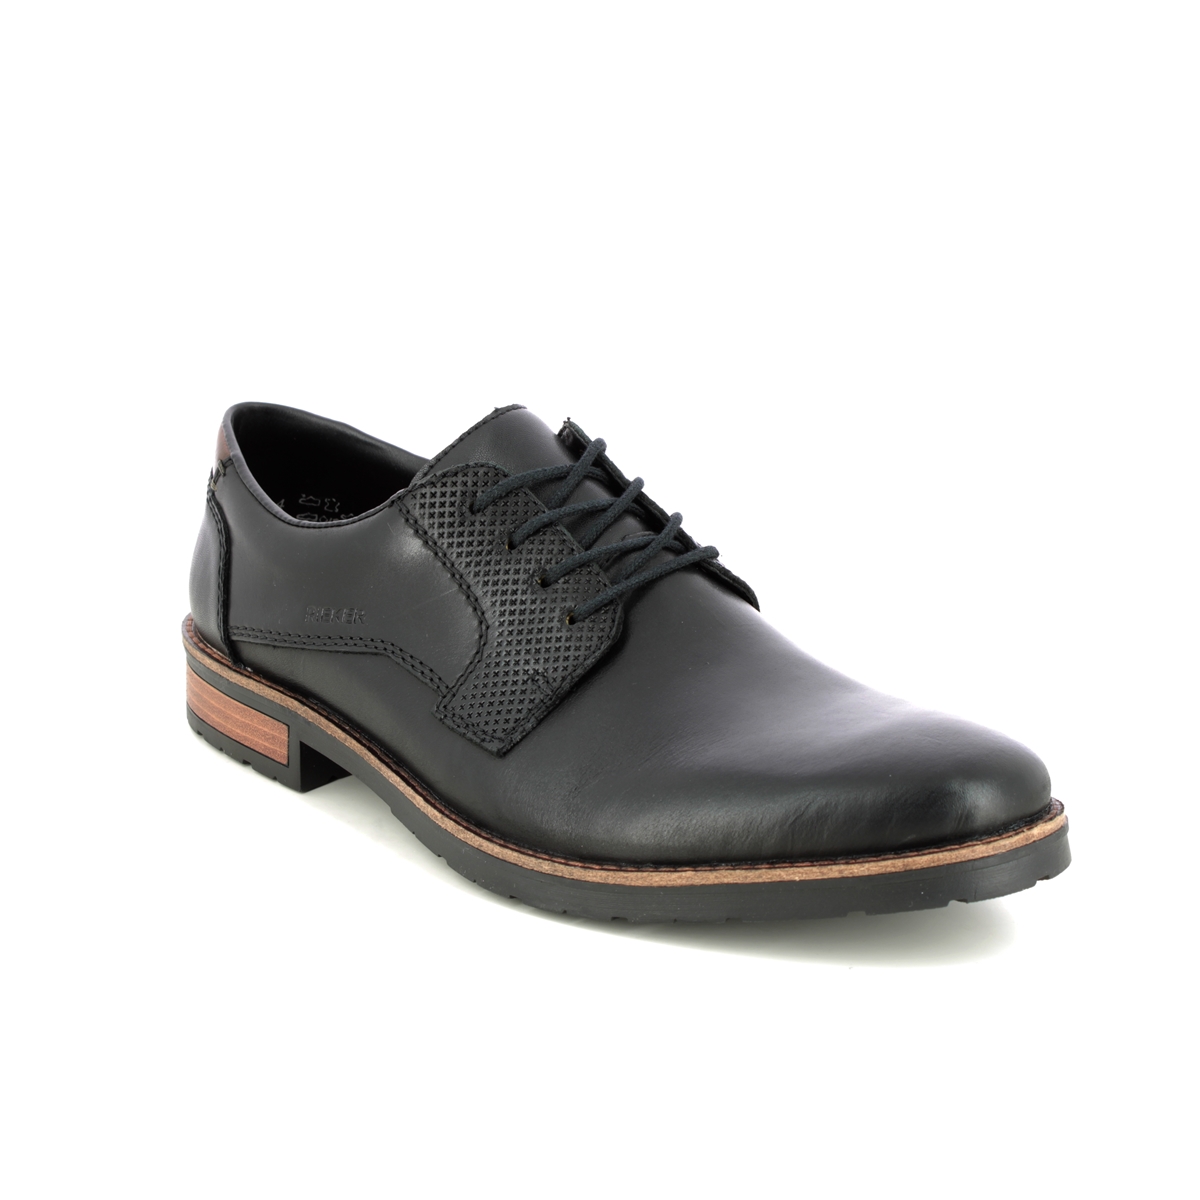 Rieker Claradam Black Leather Mens Formal Shoes 14601-00 In Size 46 In Plain Black Leather